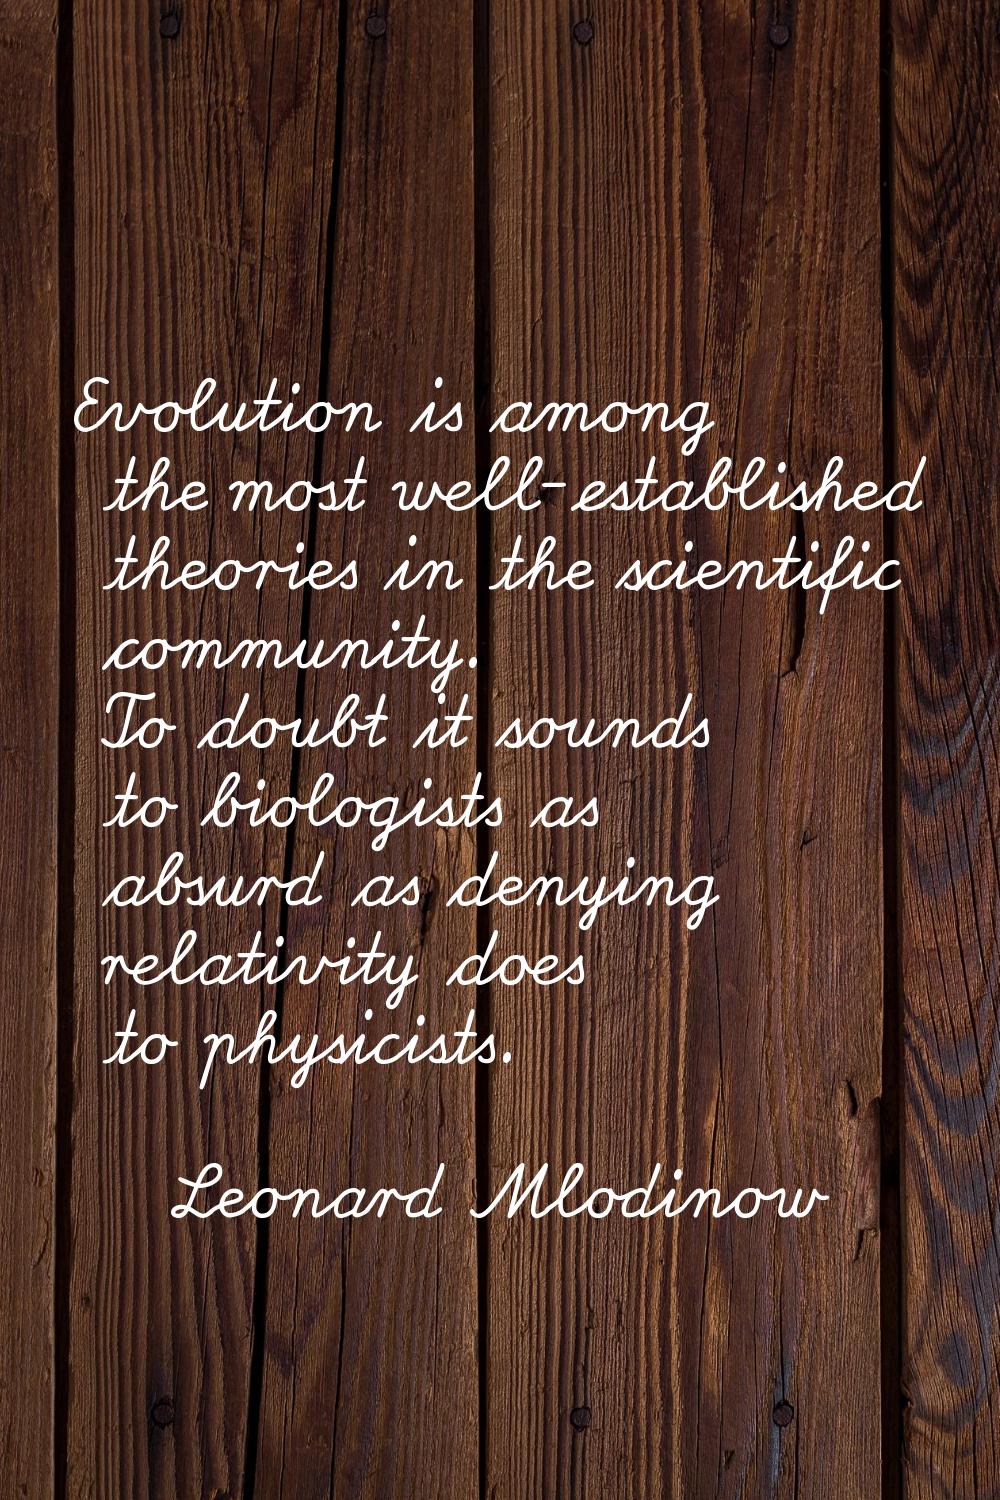 Evolution is among the most well-established theories in the scientific community. To doubt it soun